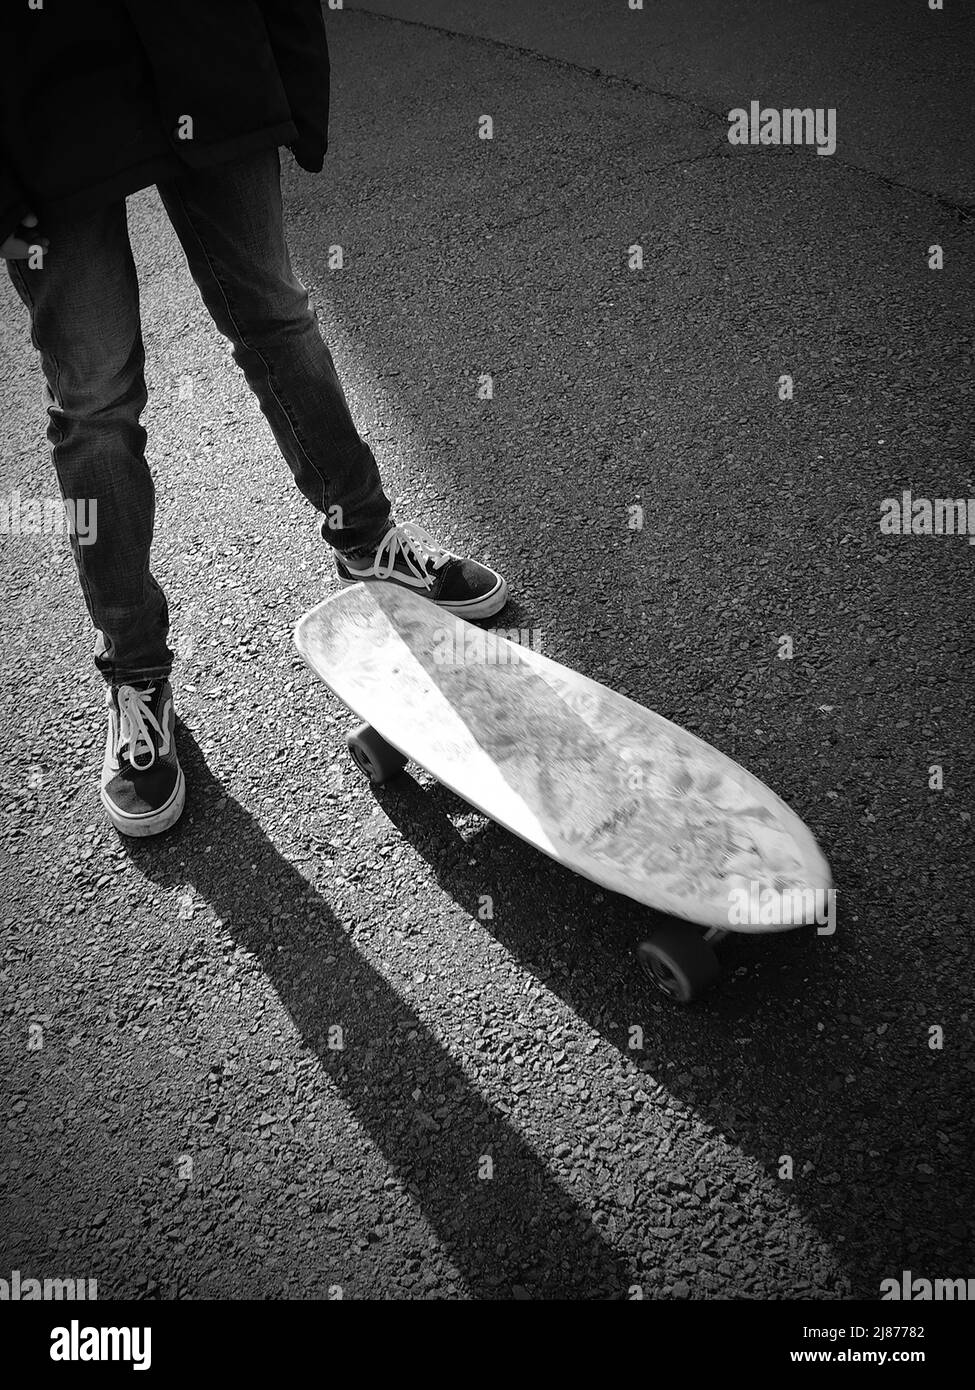 Skateboarder riding in the afternoon Stock Photo